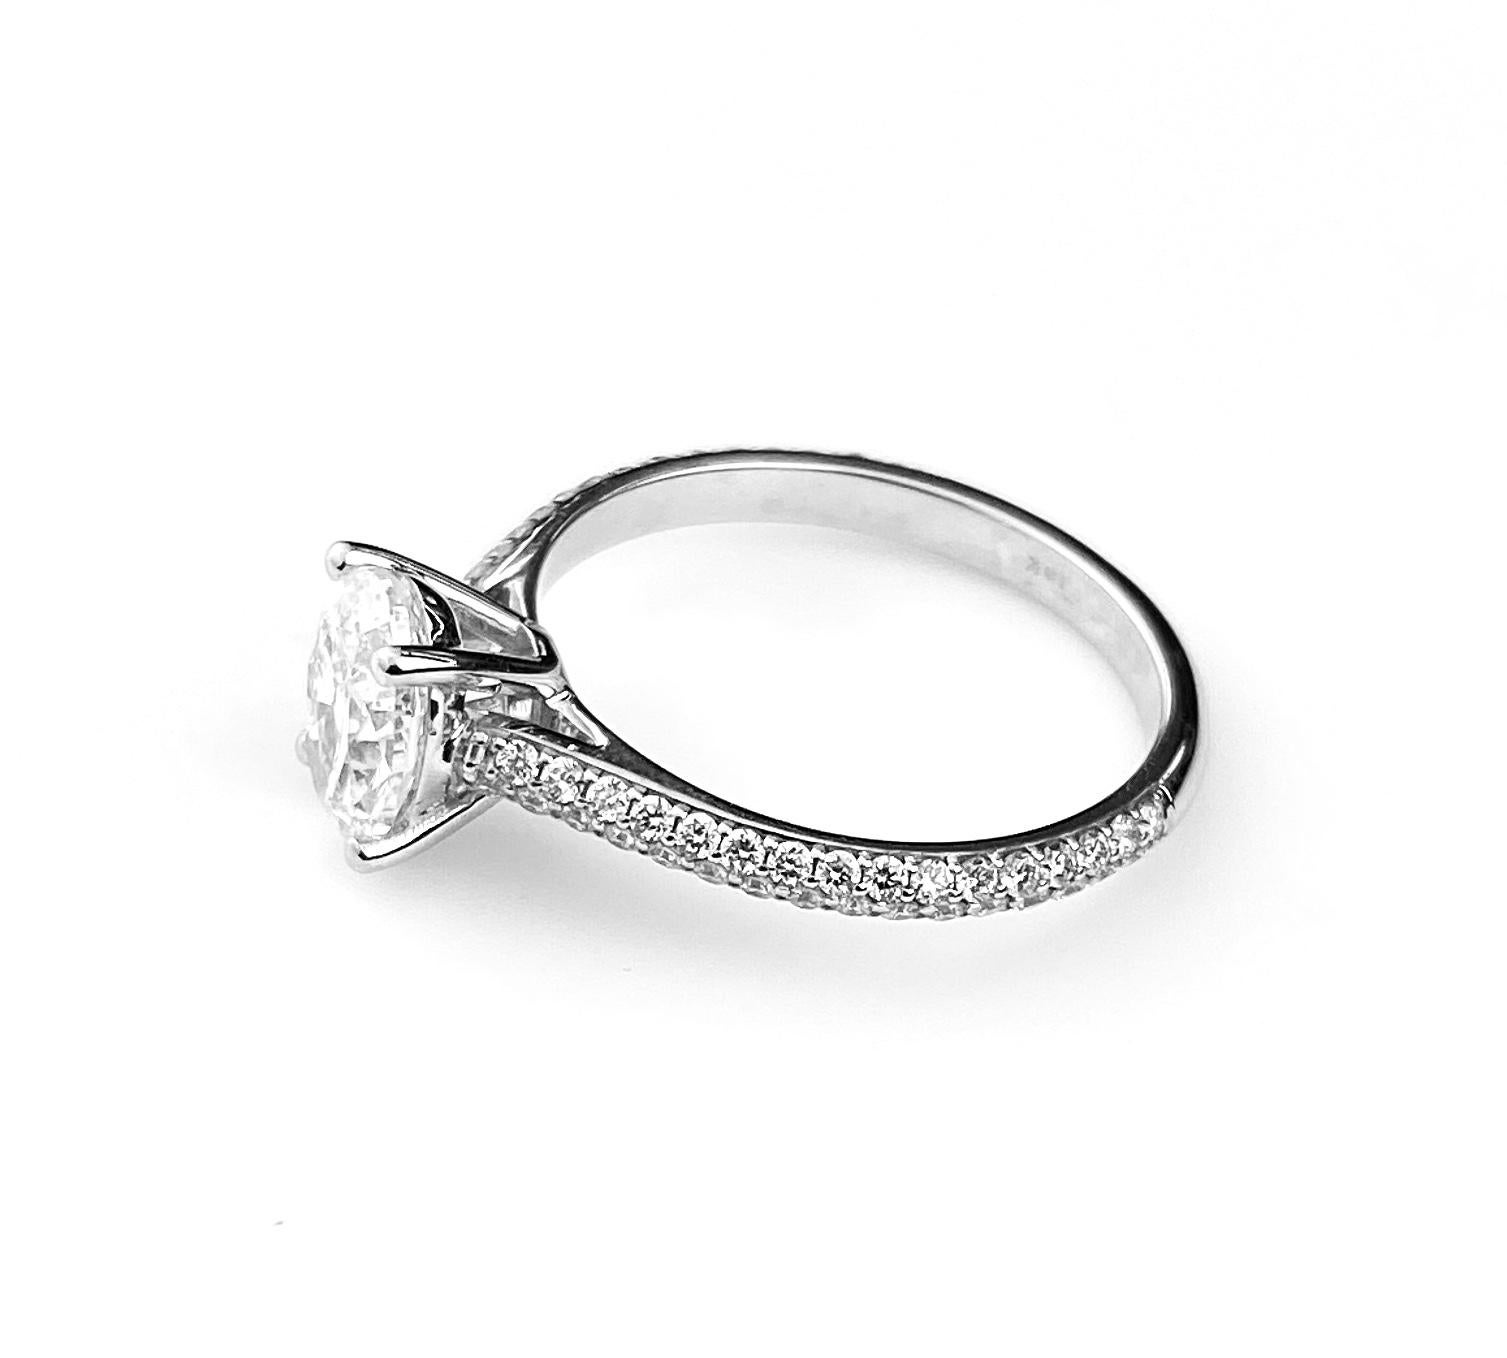 Oval cut diamond solitaire engagement ring with 1.01ct D SI1 center diamond GIA# 2127267236. Set in a 18kt white gold with two-row pave' band set 3/4 around the shank, with rising shoulders. Side diamonds equal 0.38ct total, and are F/G colour and